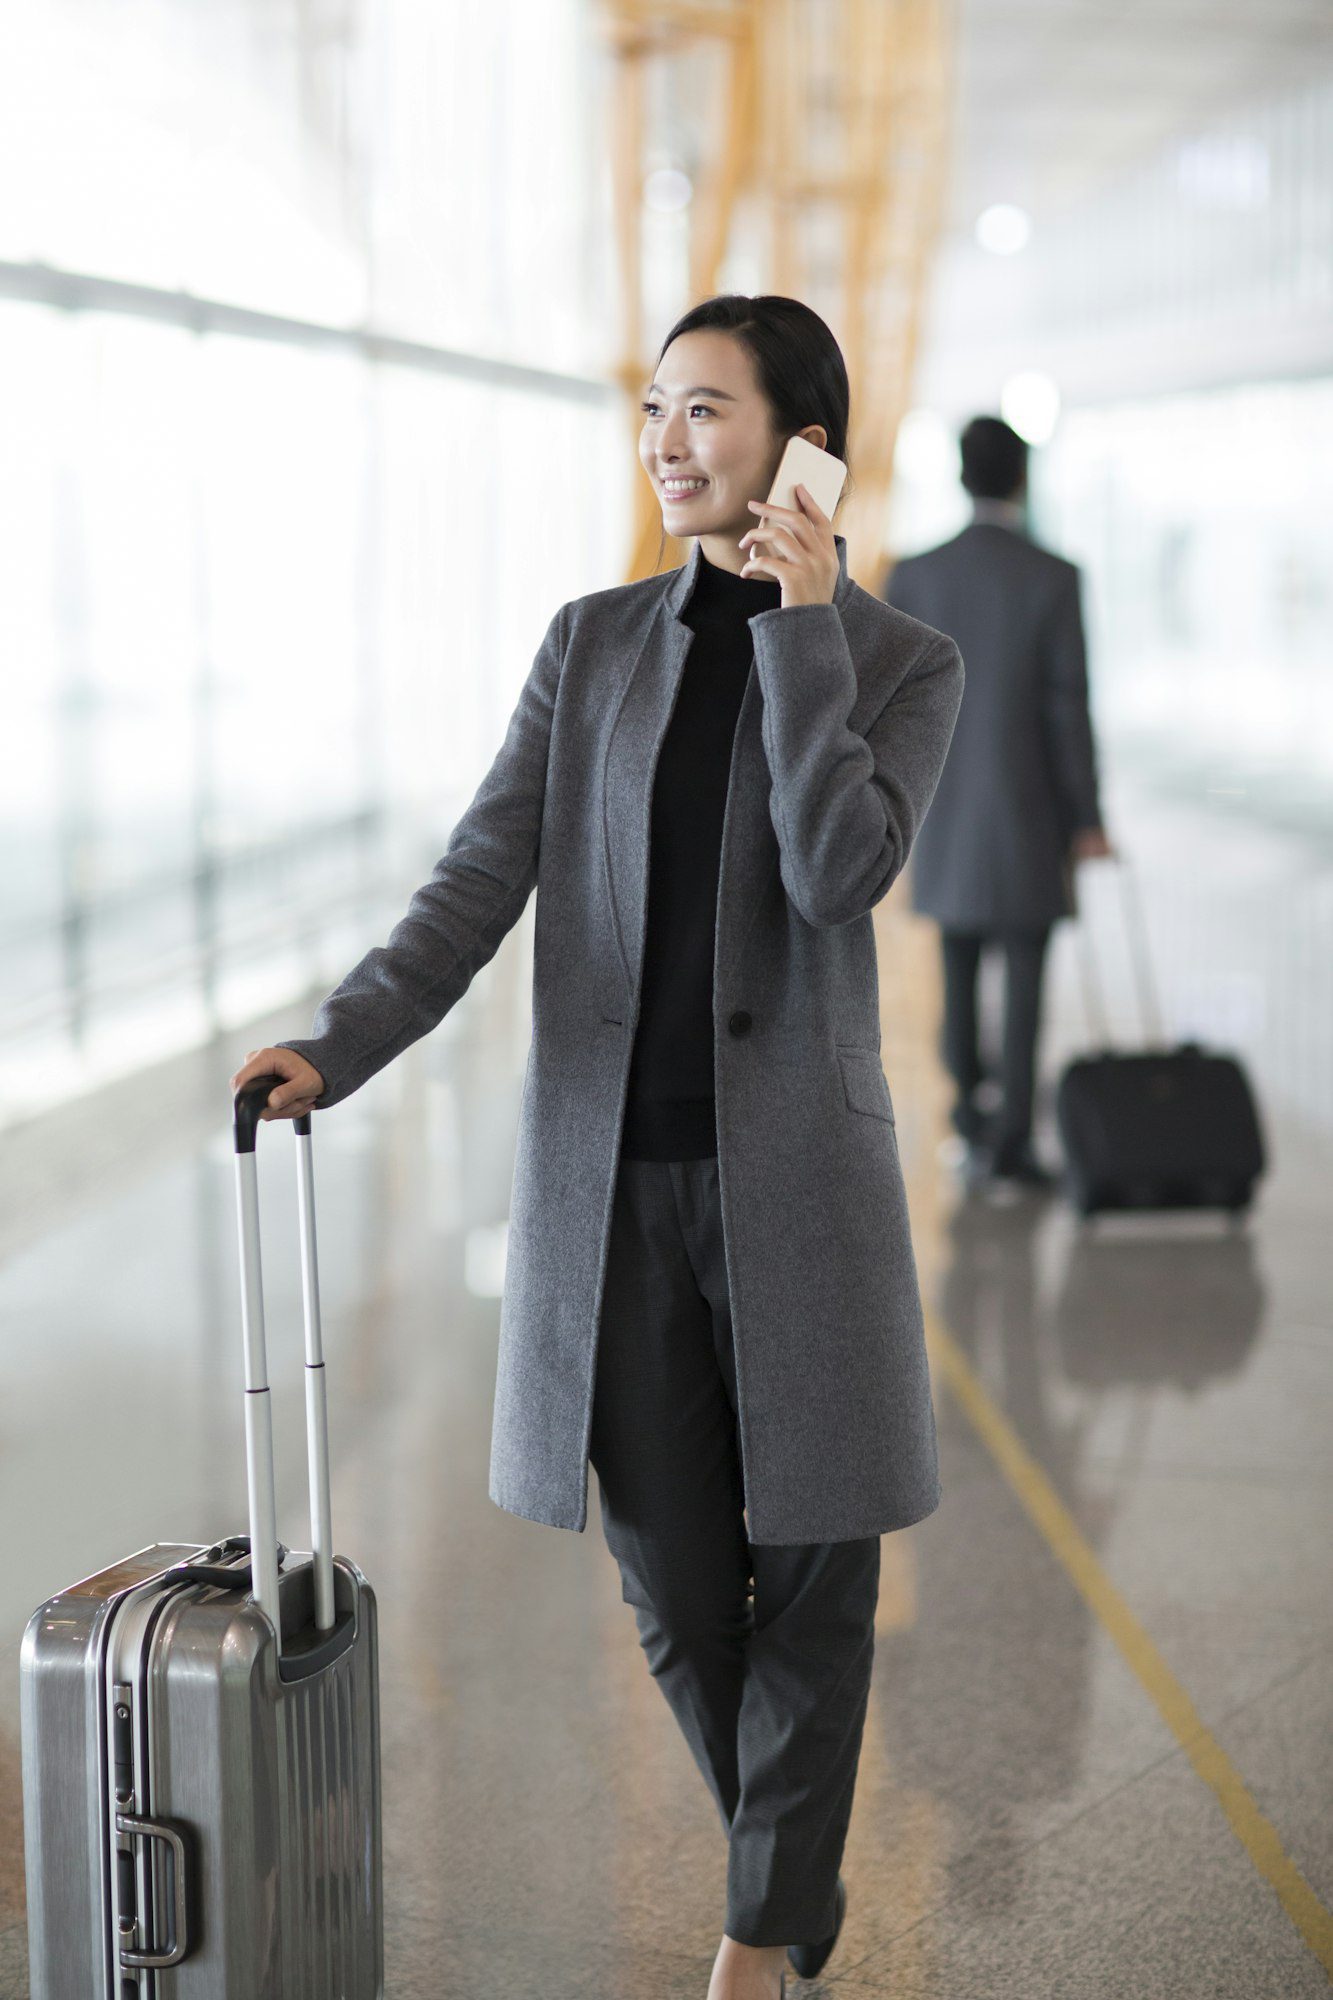 Businesswoman talking on the phone at the airport